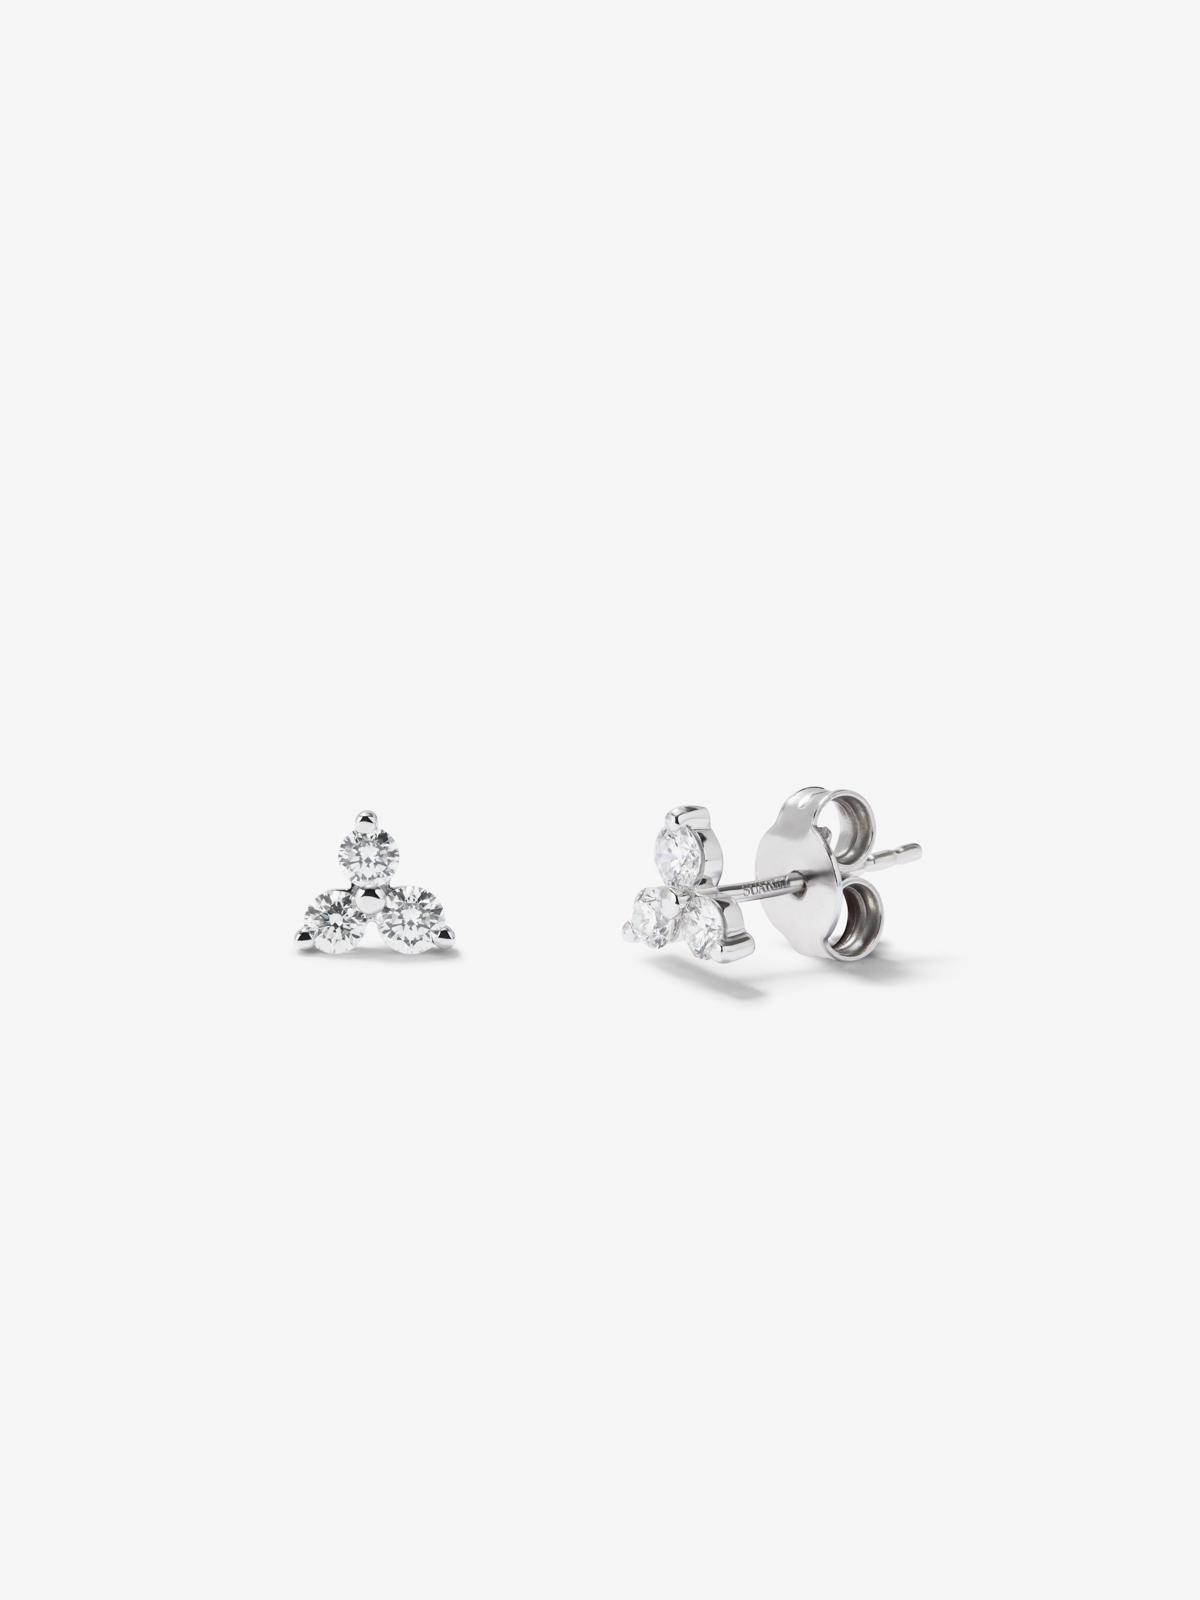 18K white gold earrings with white diamonds of 0.36 cts